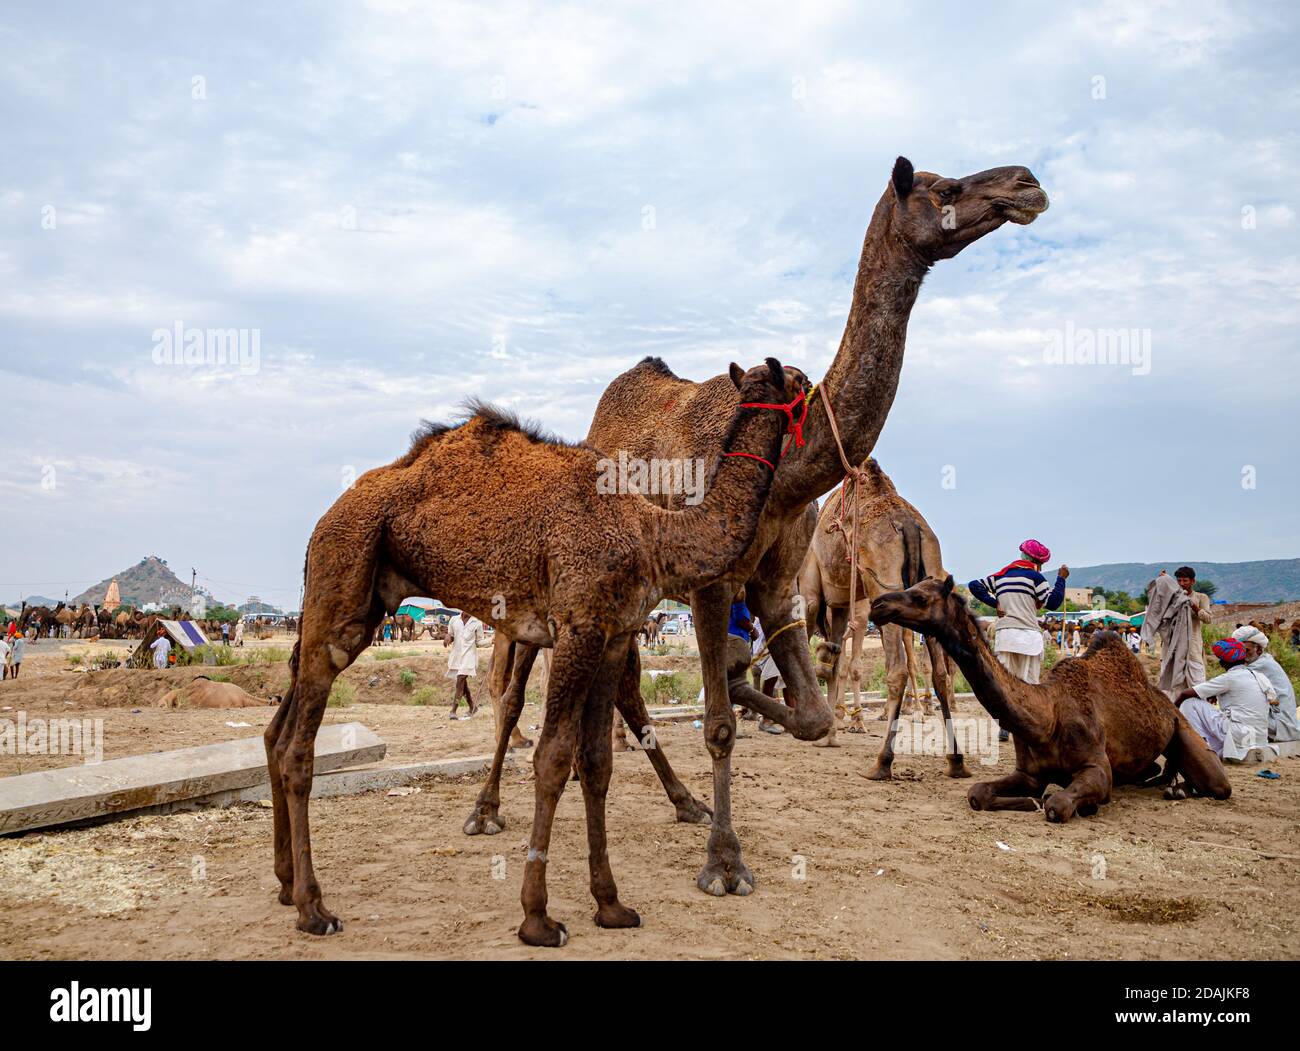 the camel and its little camel at pushkar camel festival. Stock Photo